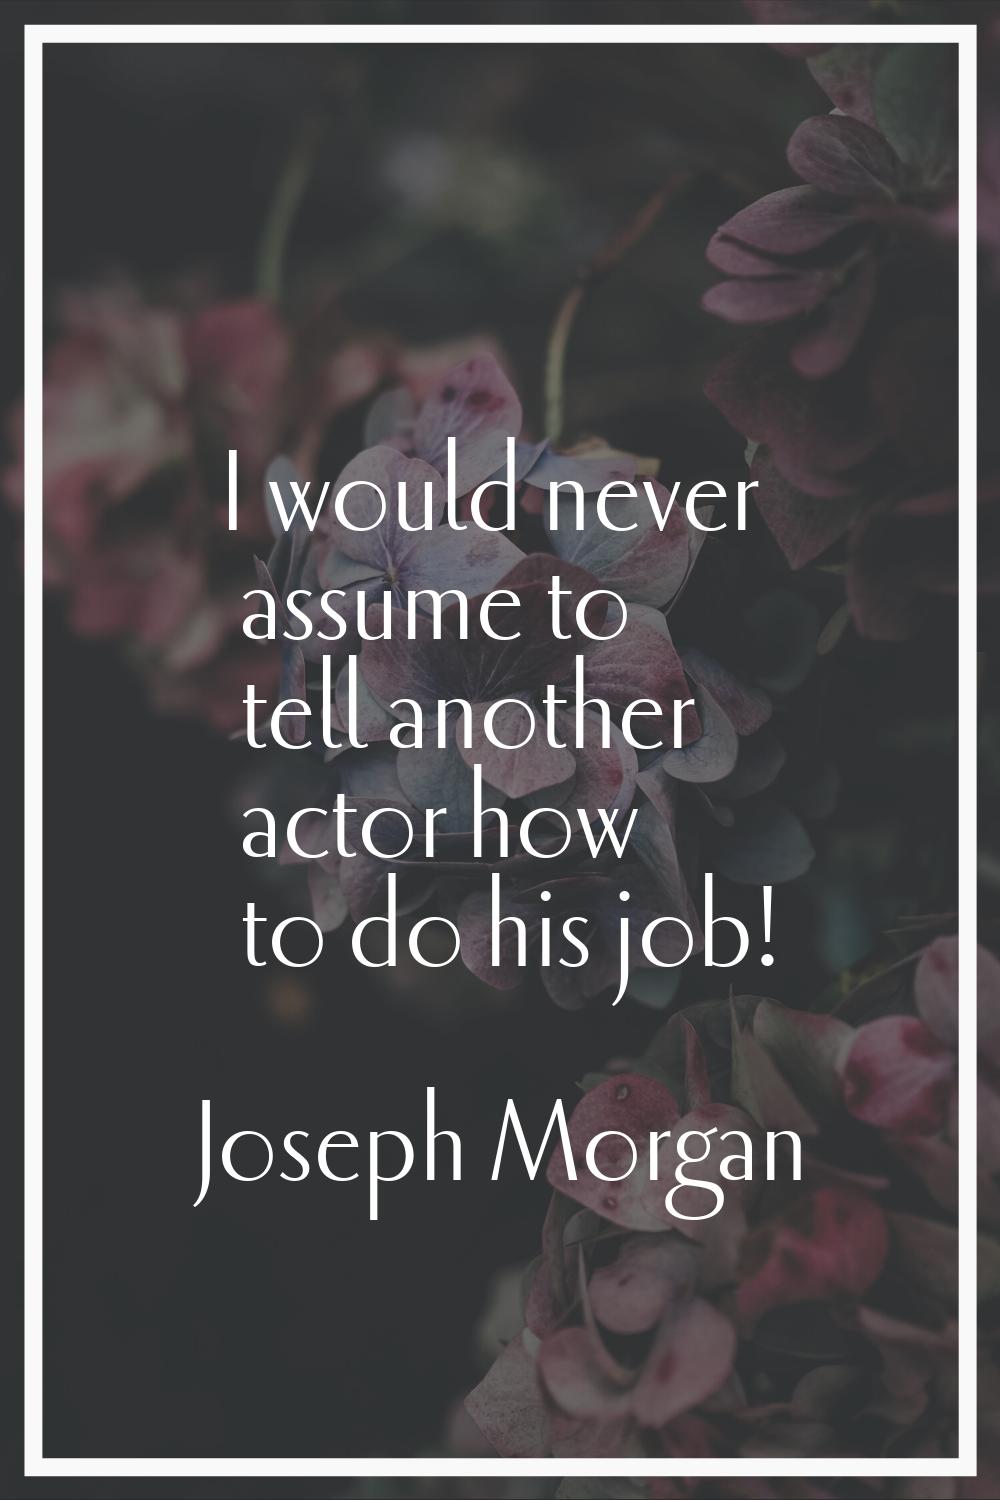 I would never assume to tell another actor how to do his job!